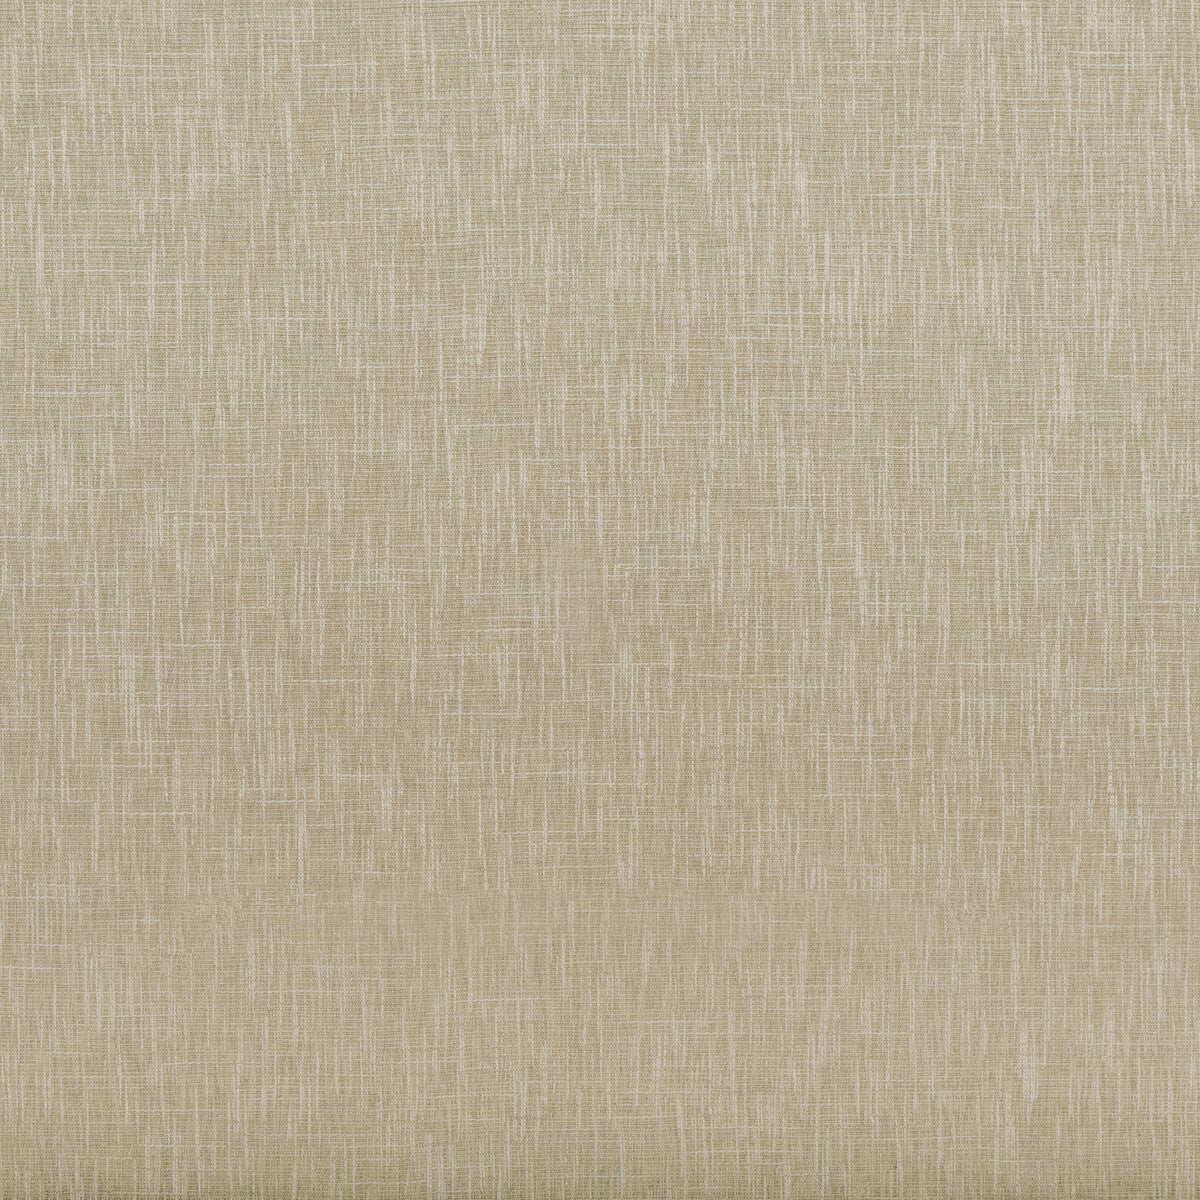 Maris fabric in sand color - pattern 35923.16.0 - by Kravet Basics in the Monterey collection